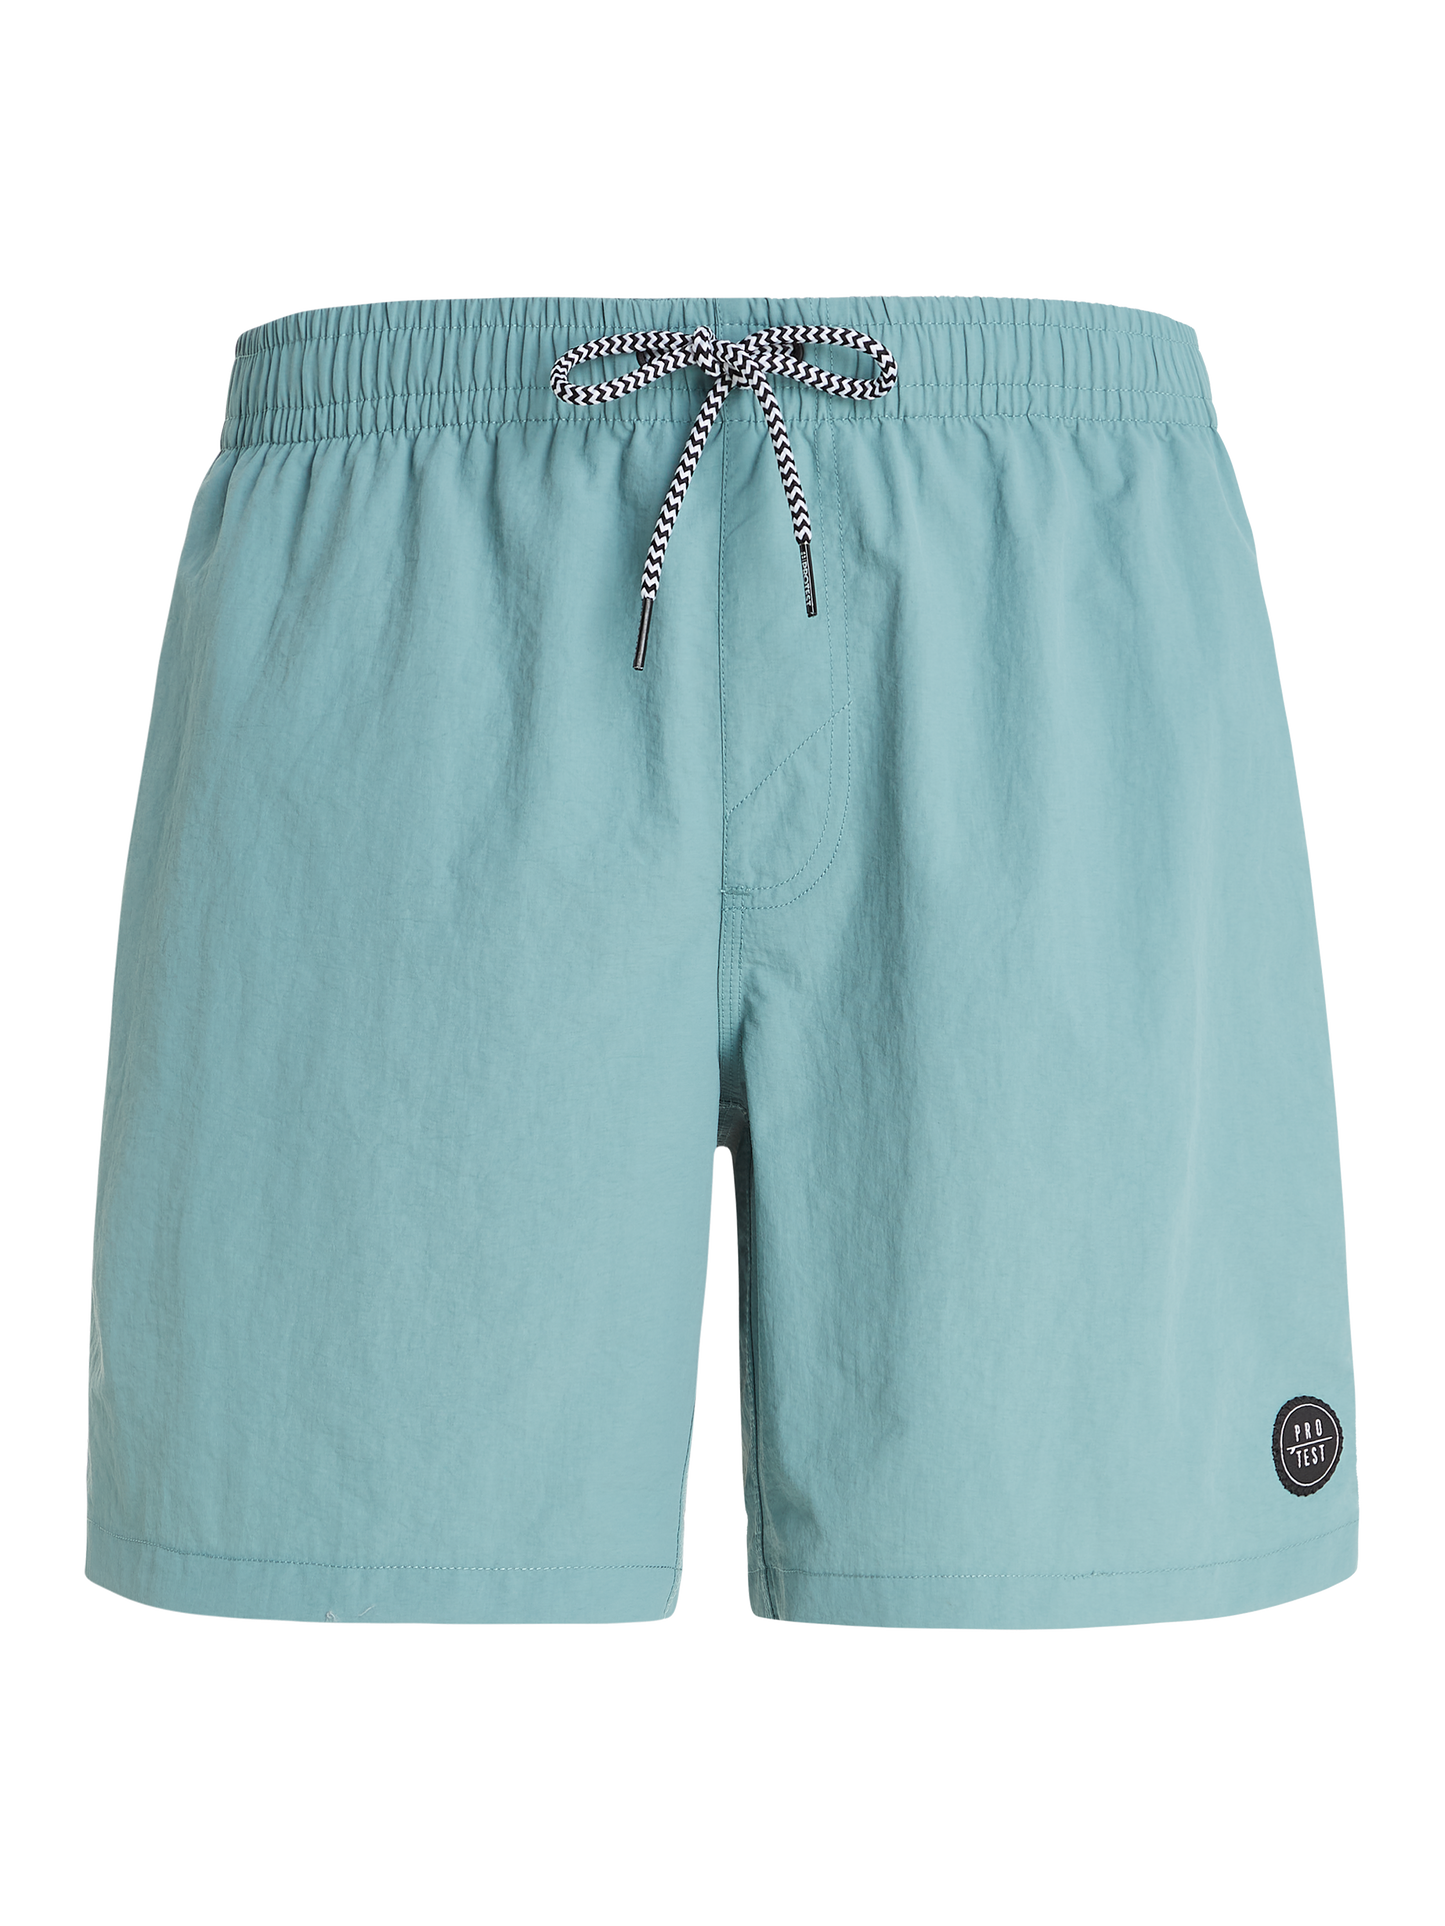 Protest Faster Swim Shorts in Arctic Green